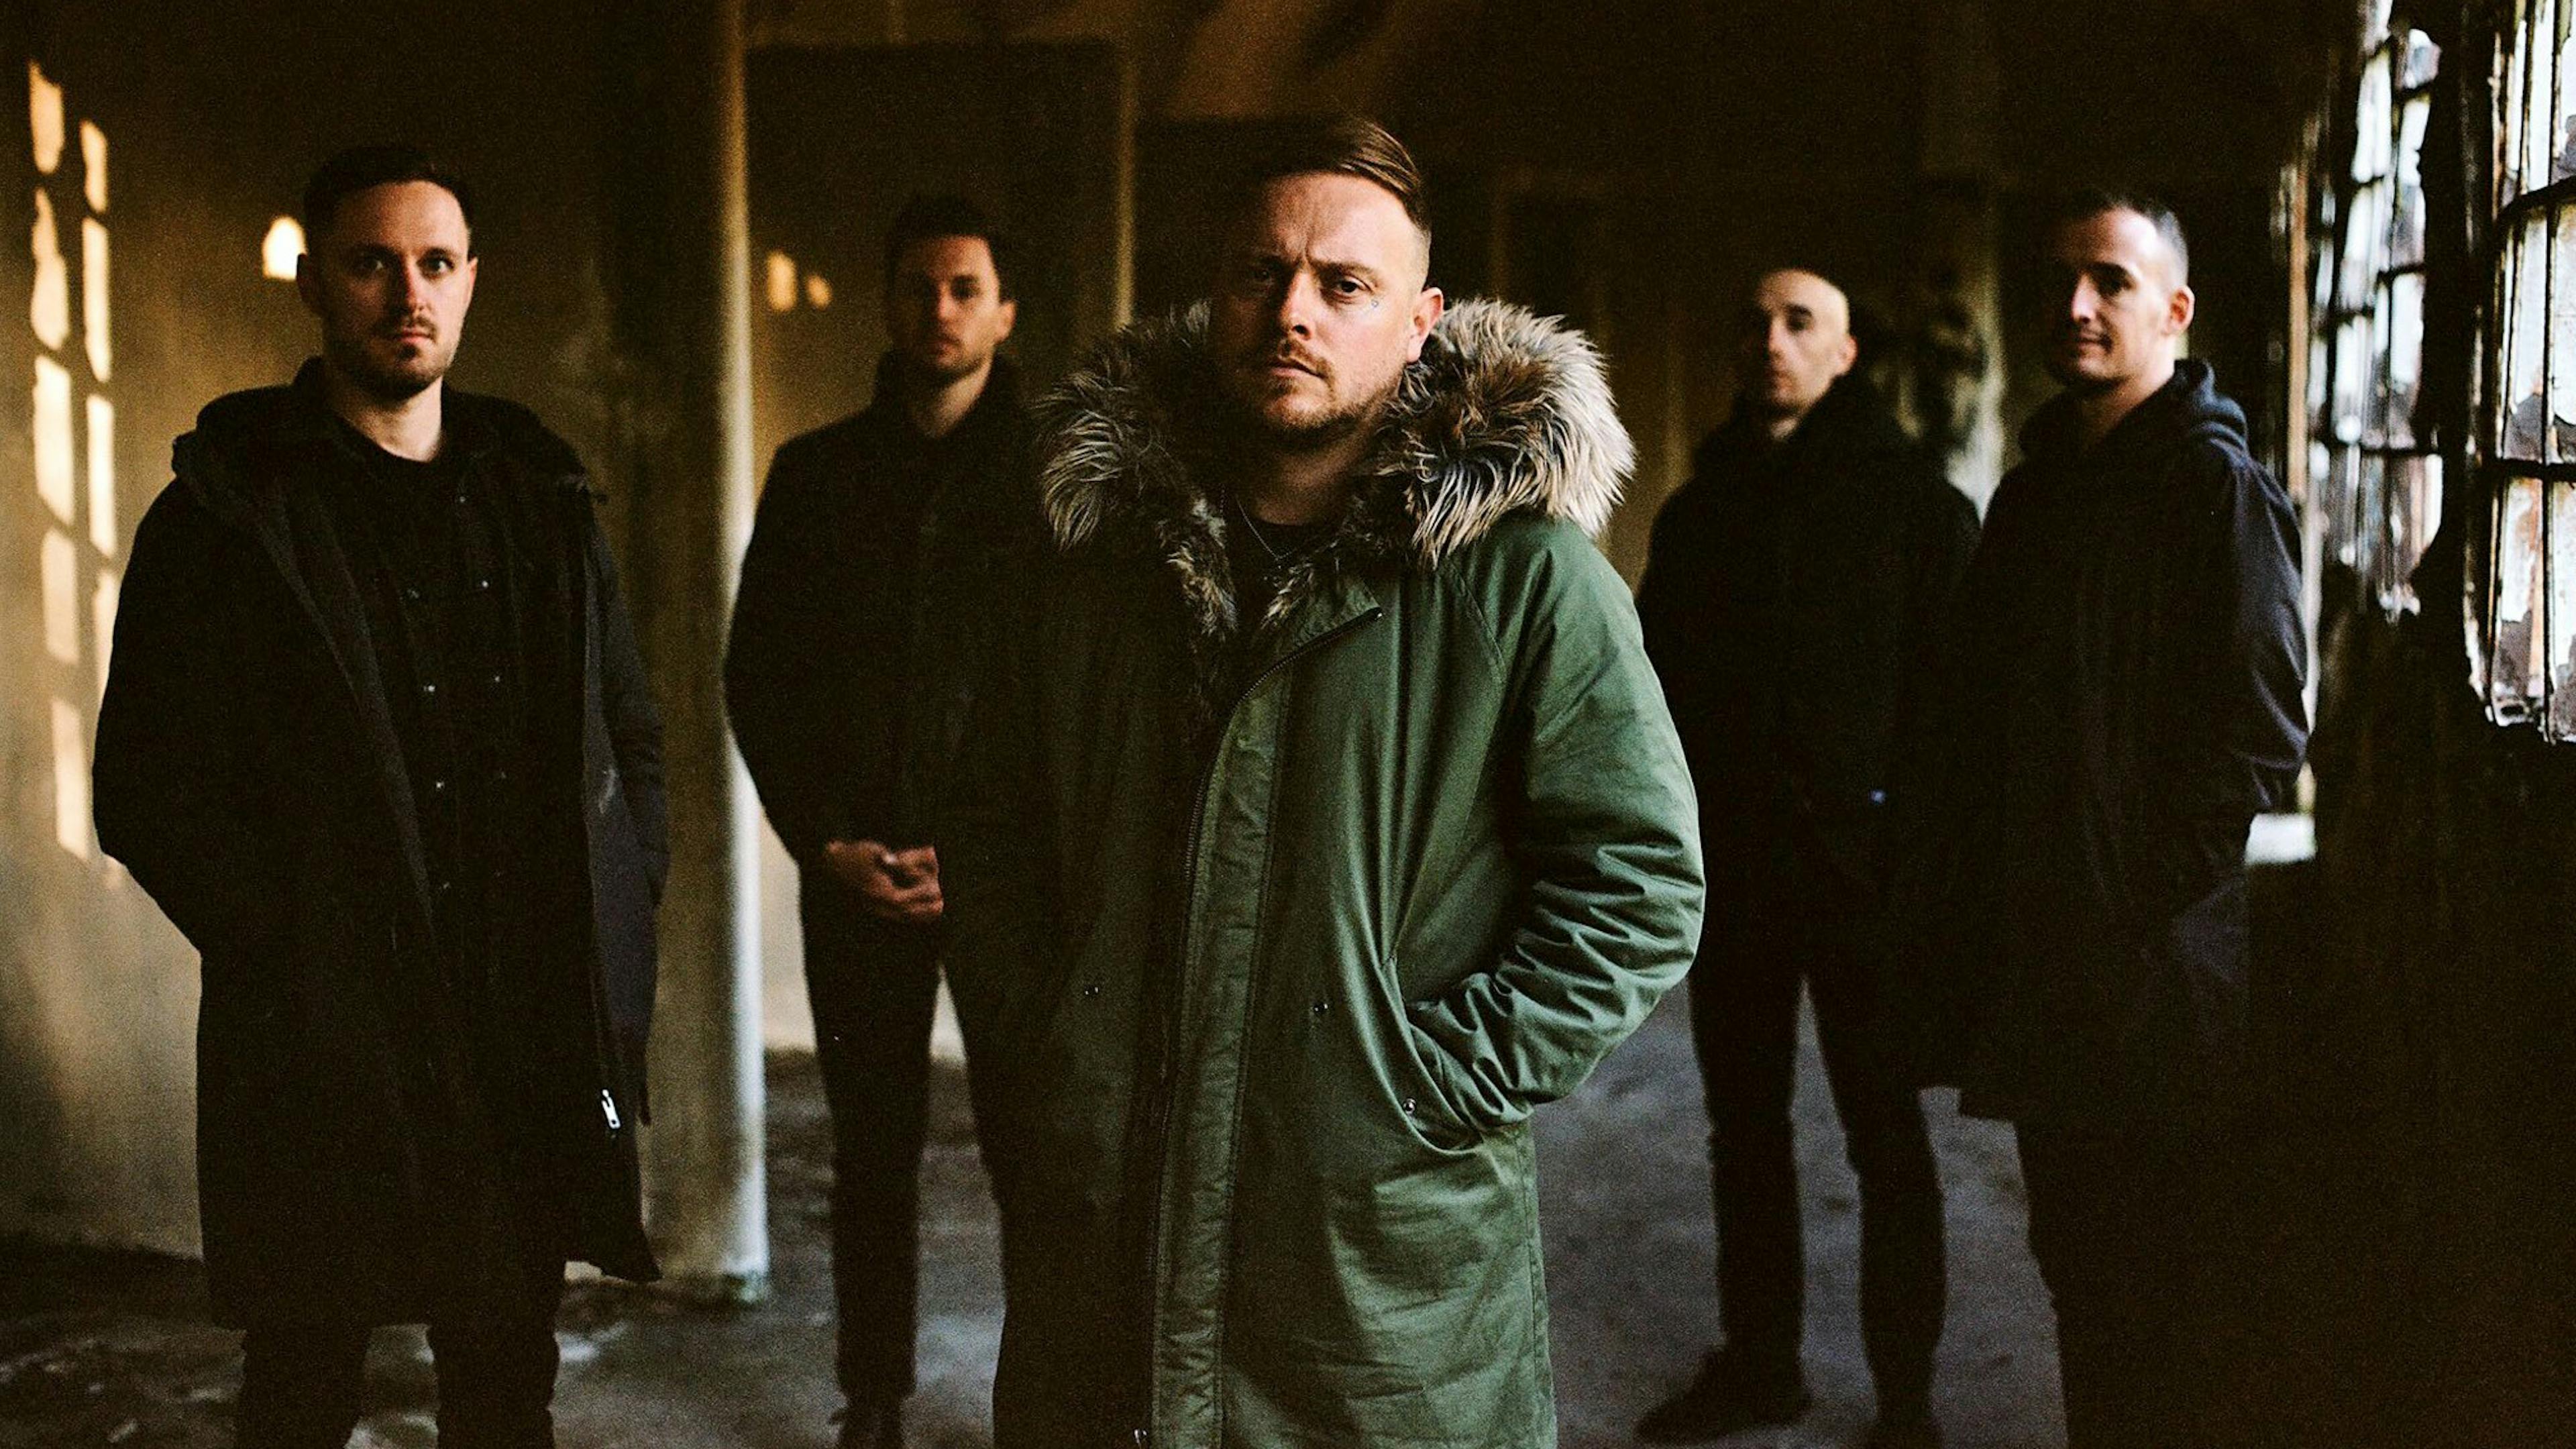 Architects return with slamming new track When We Were Young